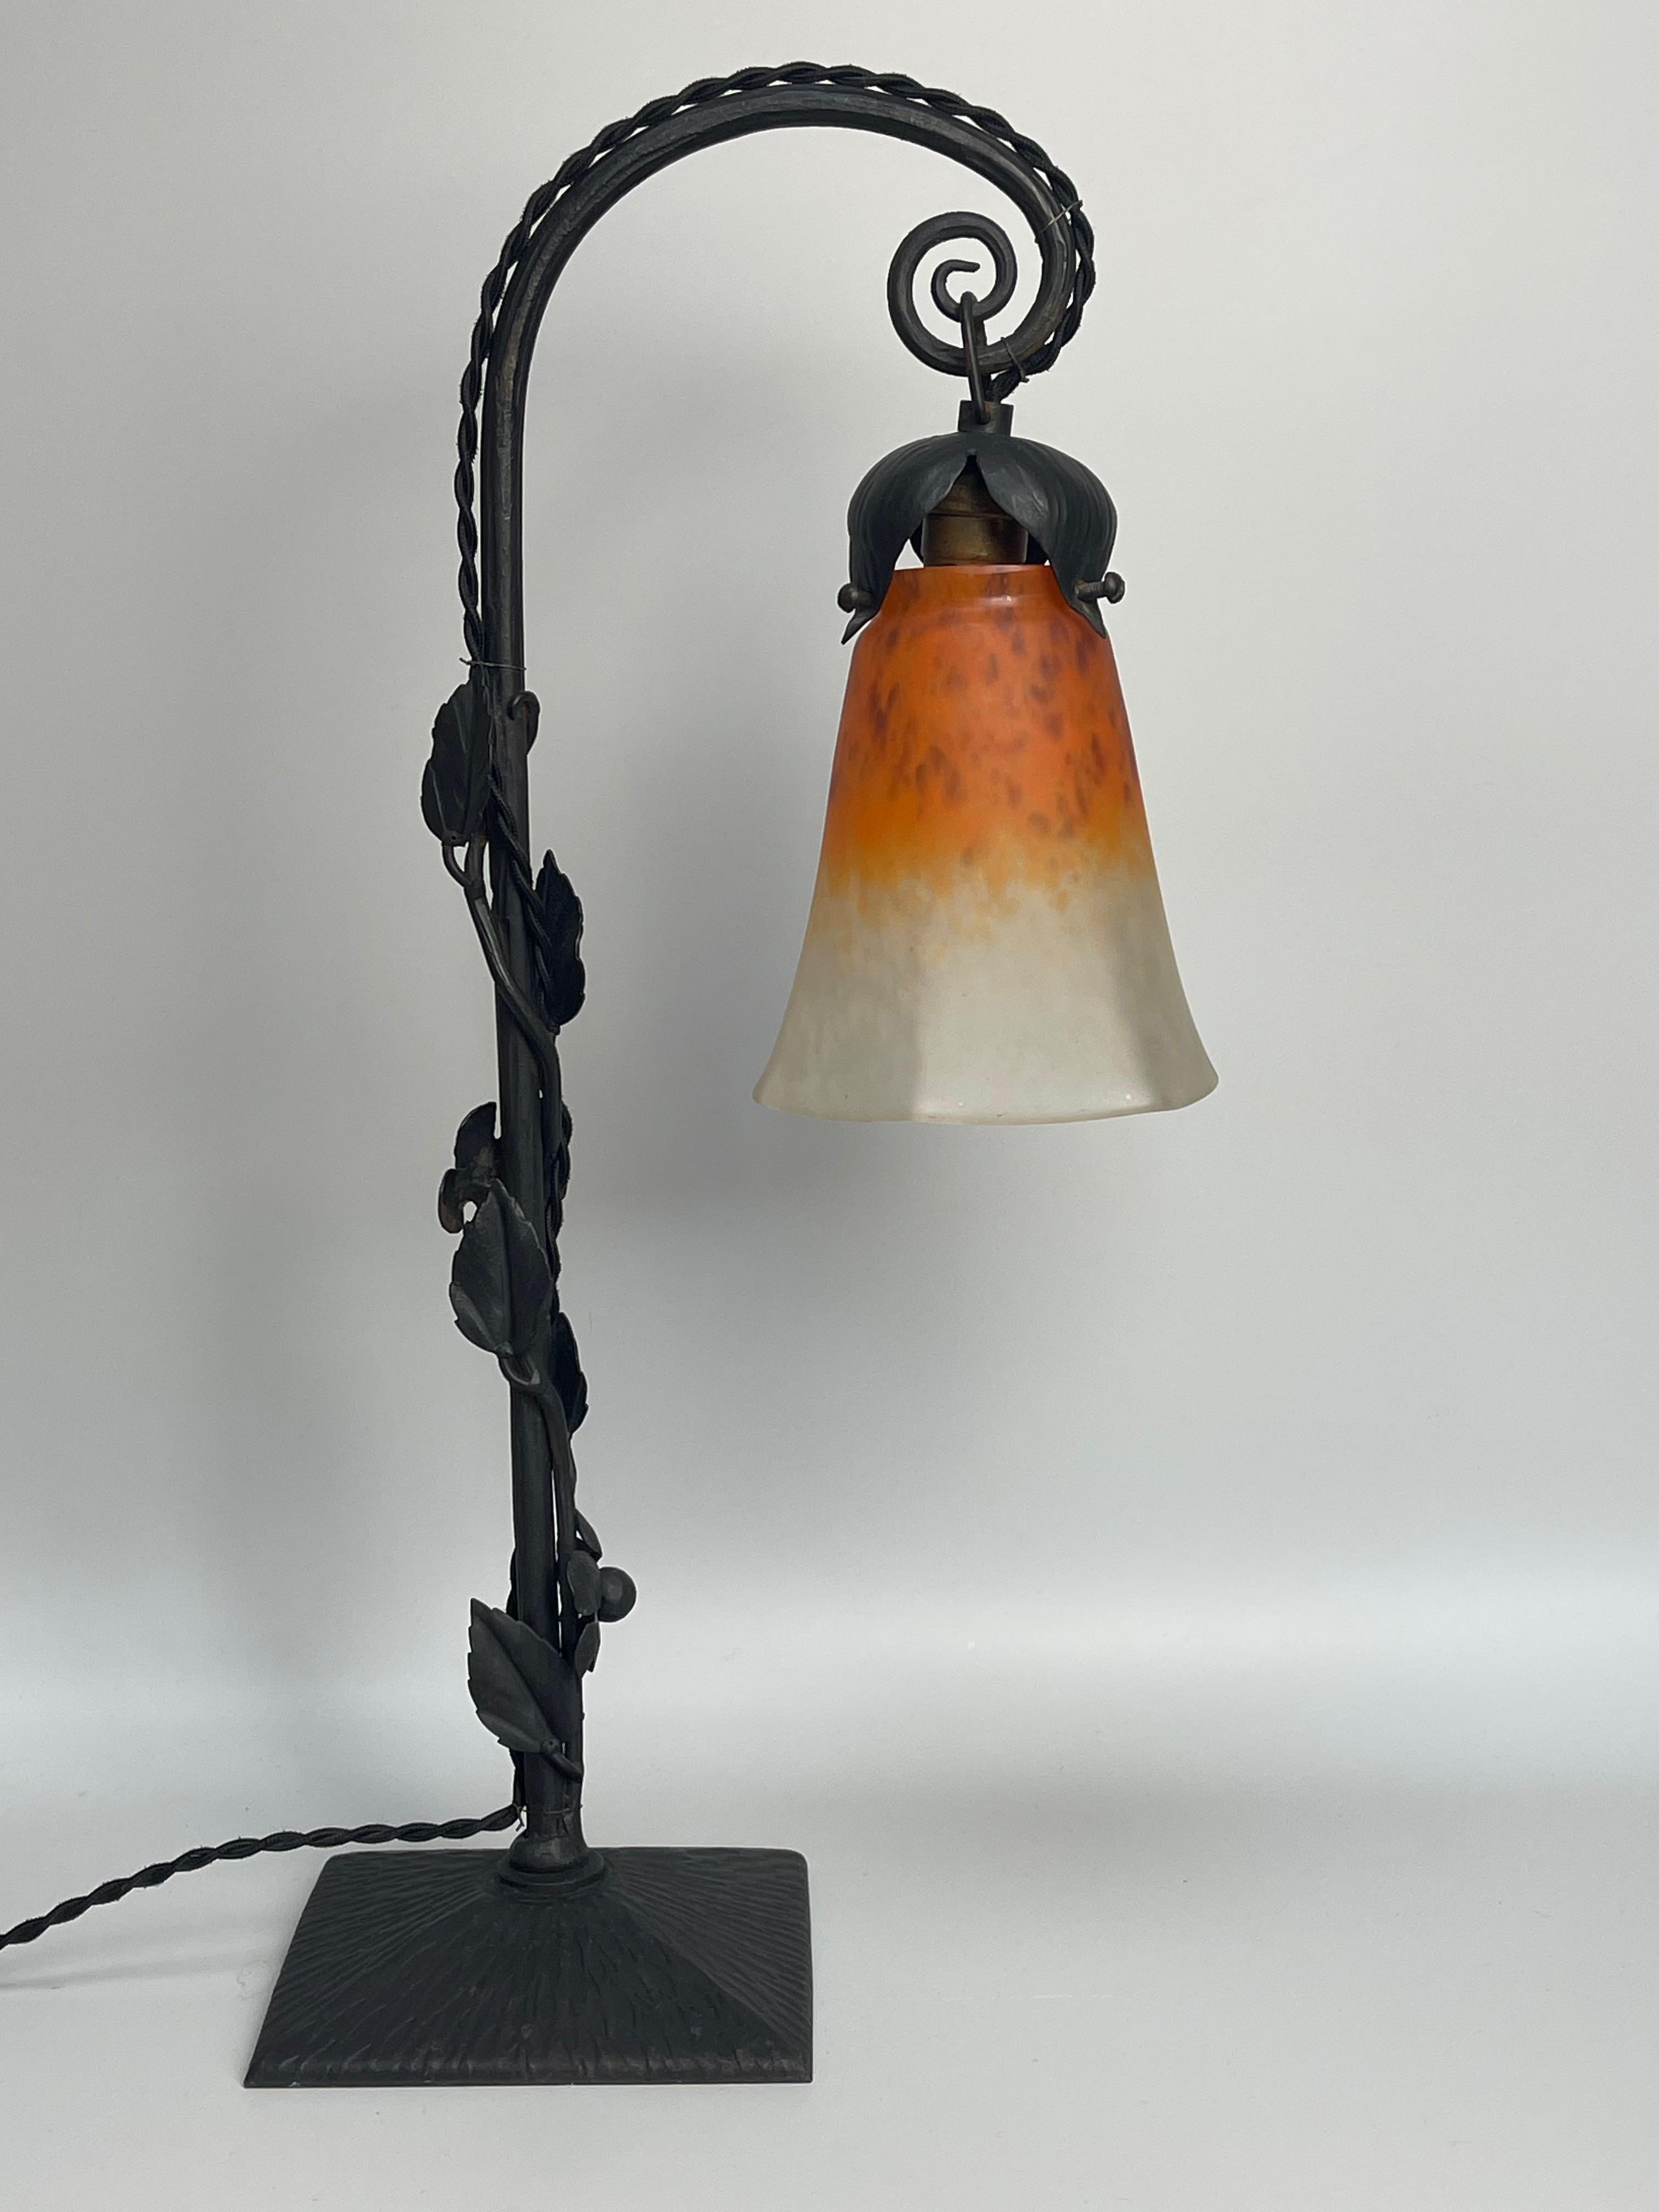 Art deco lamp, black patina wrought iron foot with floral decoration.
Tulip in white and orange glass paste, flecked with brown. Signed Schneider.
Lamp in perfect condition and electrified.

Measures: height: 47cm
width: 25cm
base: 13.5cm x